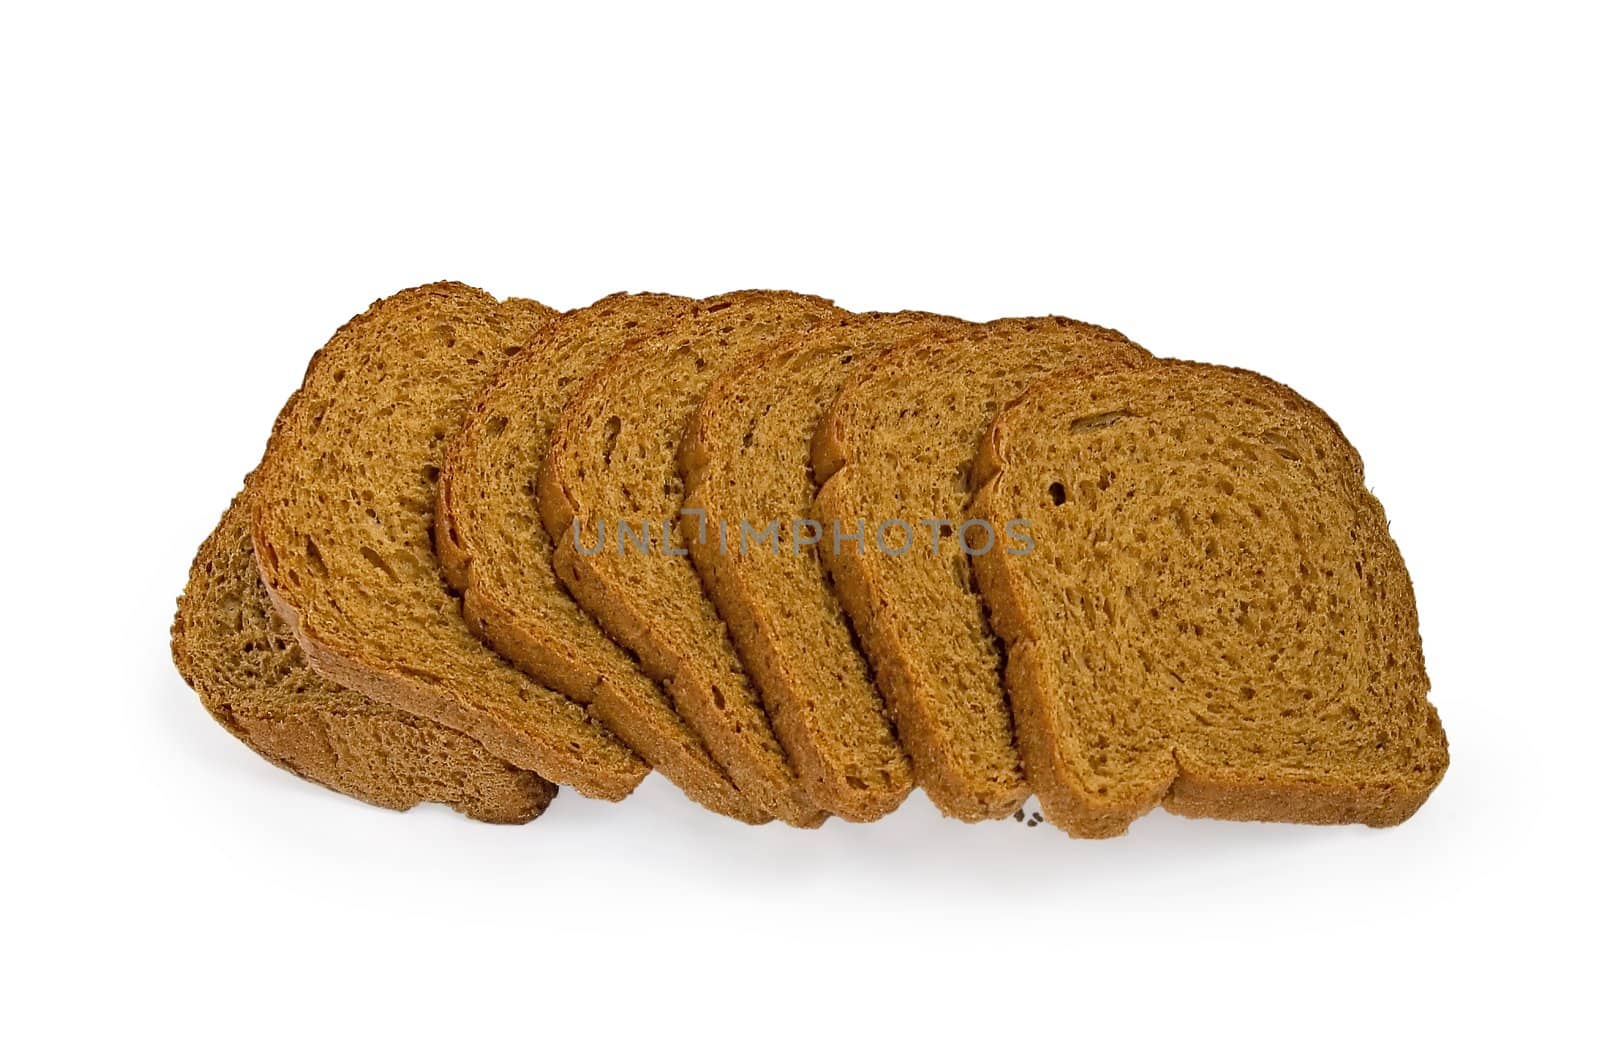 Cut the pitted rye bread on a white background